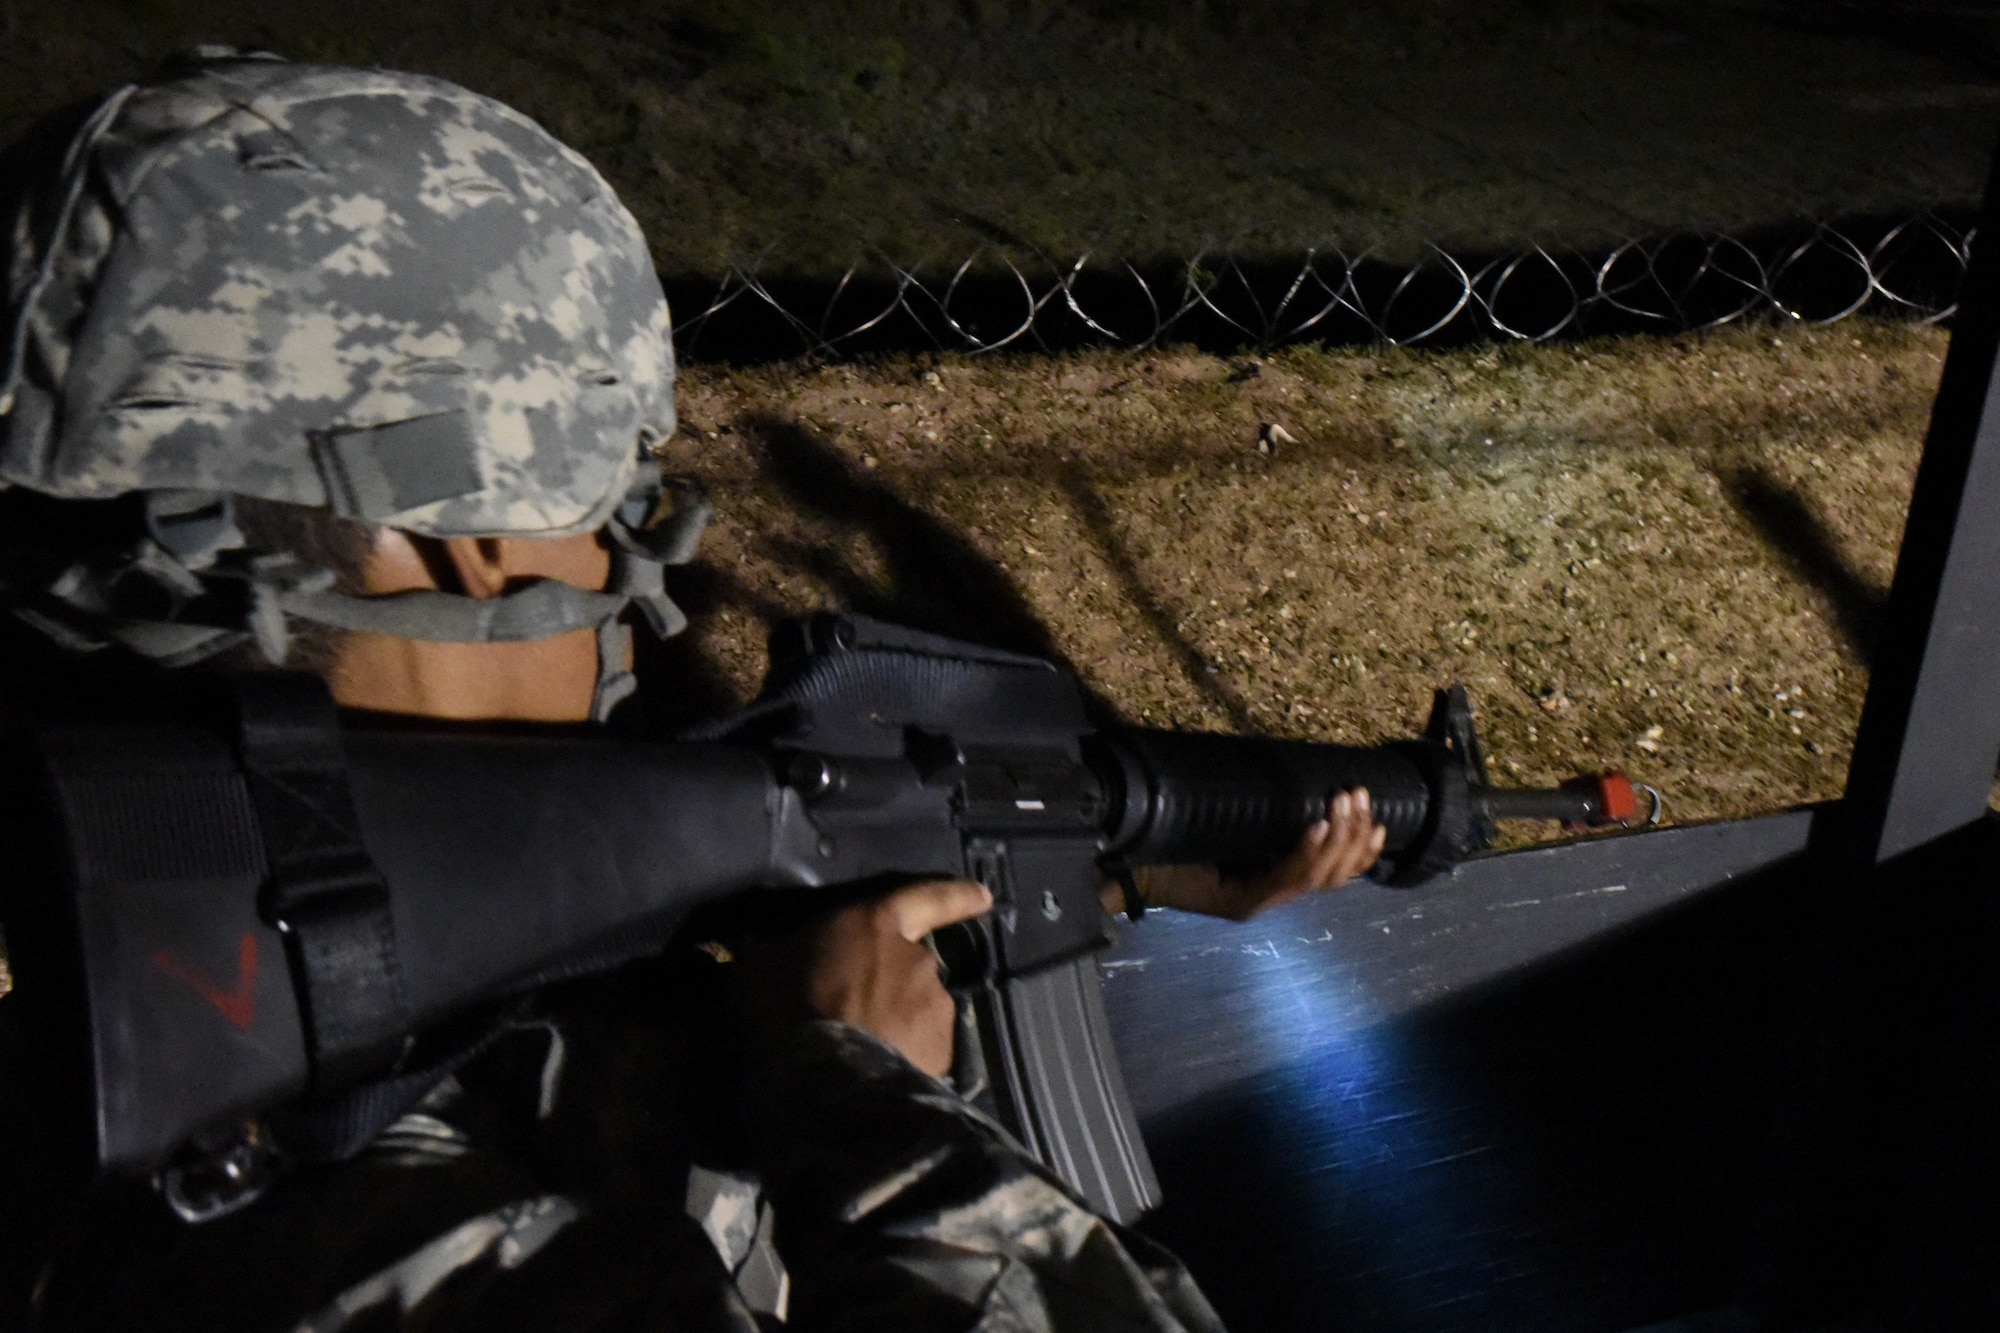 Williams Joseph, Angelo State University ROTC cadet, practices guard tower maneuvers during the night operations portion of the exercise at the mock forward operating base on Goodfellow Air Force Base, Texas, April 20, 2018. The cadets had multiple permanent party members acting as opposition forces testing their training throughout the night. (U.S. Air Force photo by Airman 1st Class Seraiah Hines/Released)